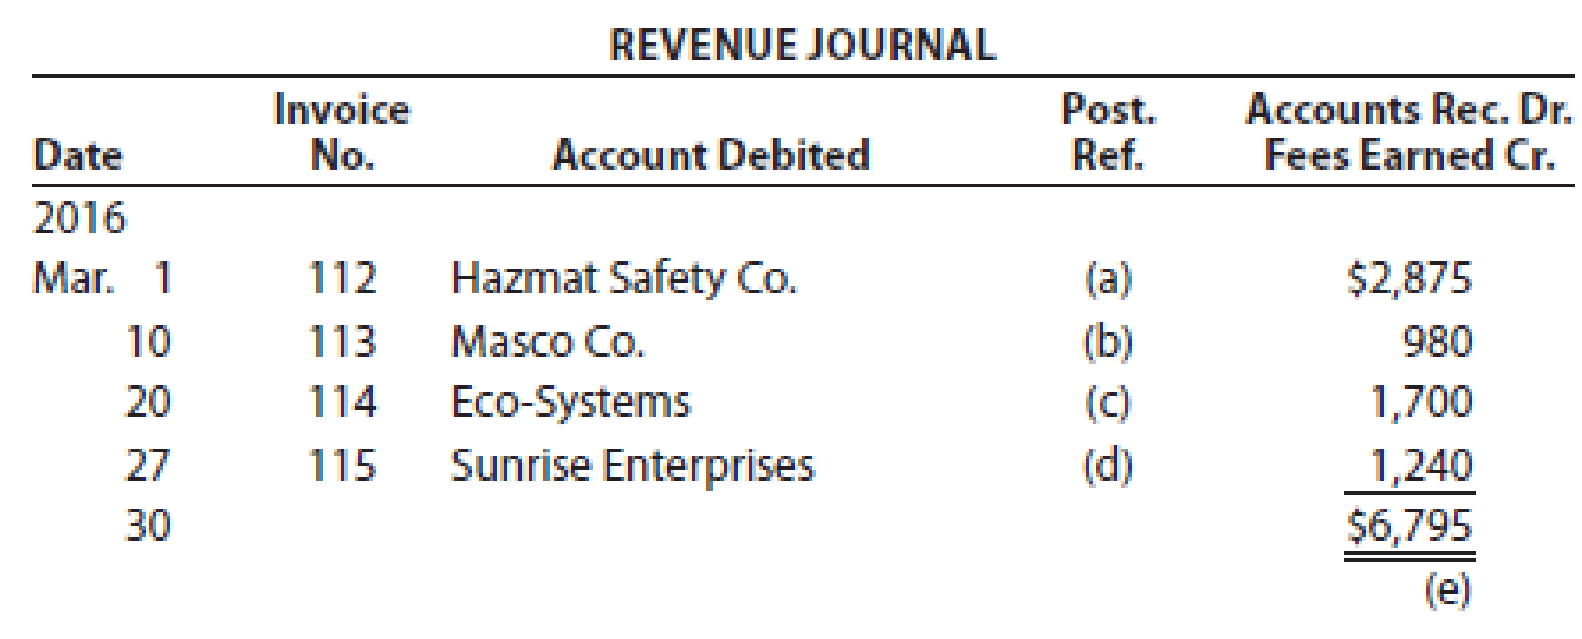 Chapter 5, Problem 1E, Using the following revenue journal for Zeta Services Inc., identify each of the posting references, 